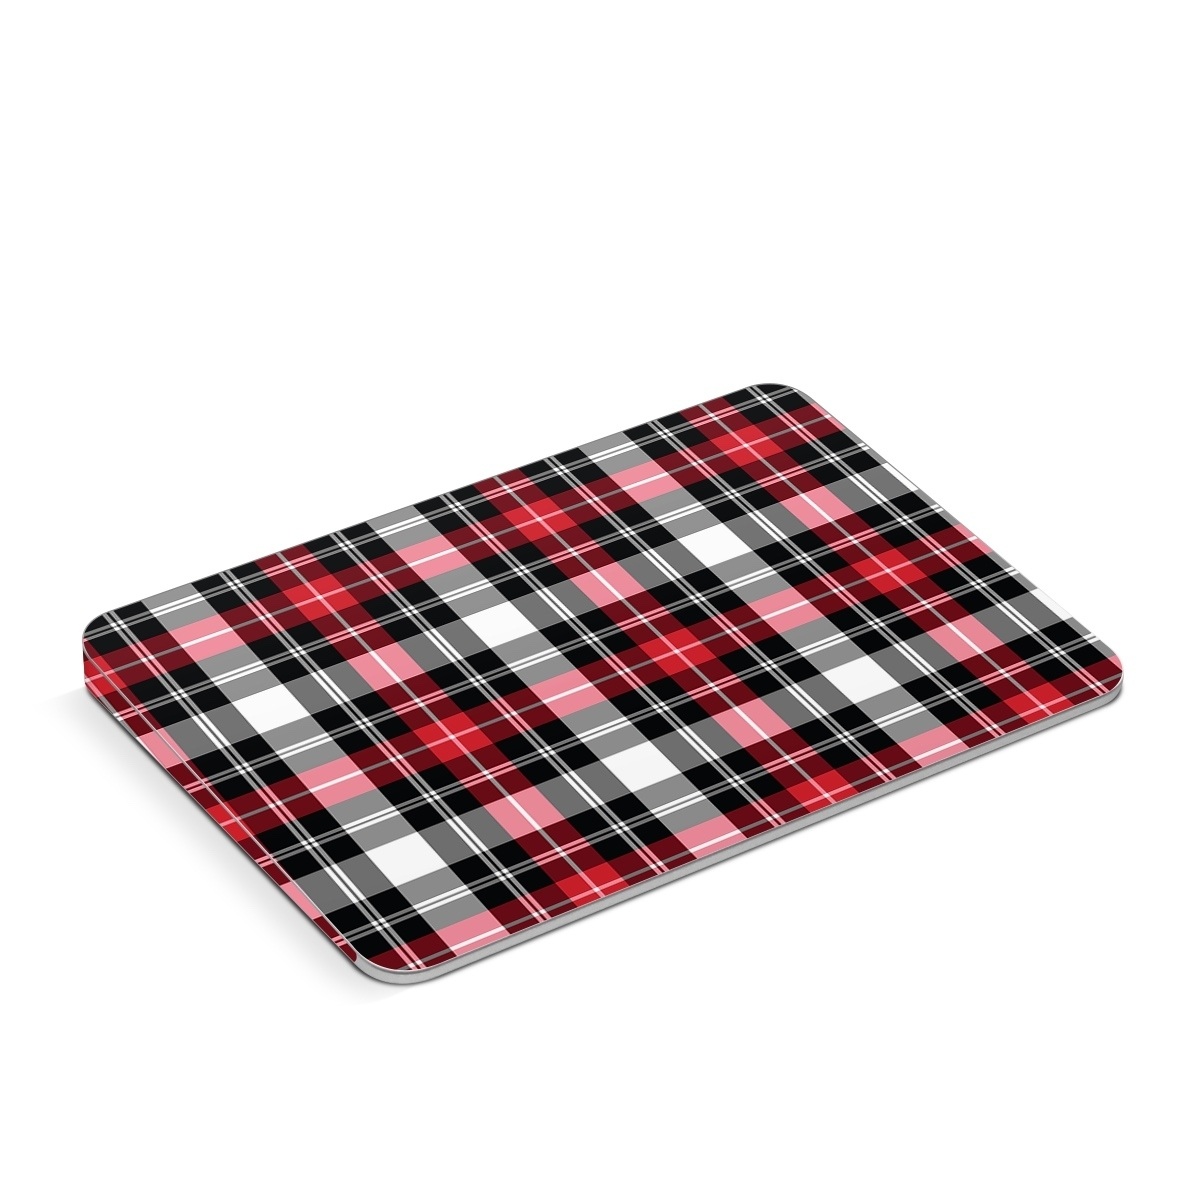 Apple Magic Trackpad Skin design of Plaid, Tartan, Pattern, Red, Textile, Design, Line, Pink, Magenta, Square, with black, gray, pink, red, white colors